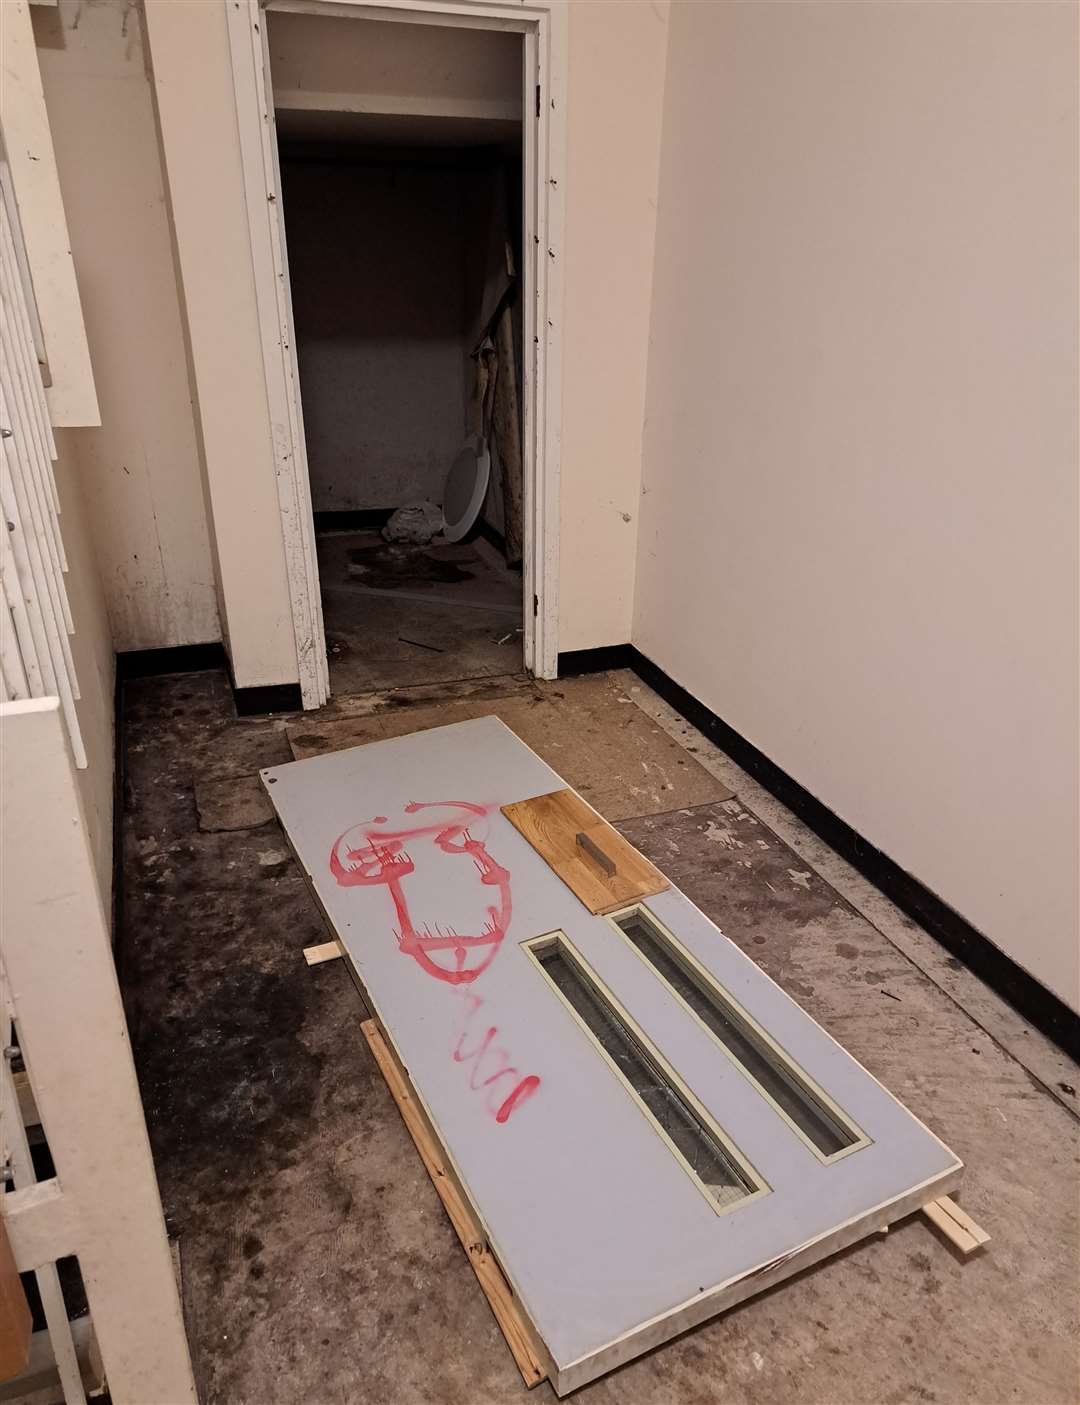 A knocked down door with an obscene drawing on it